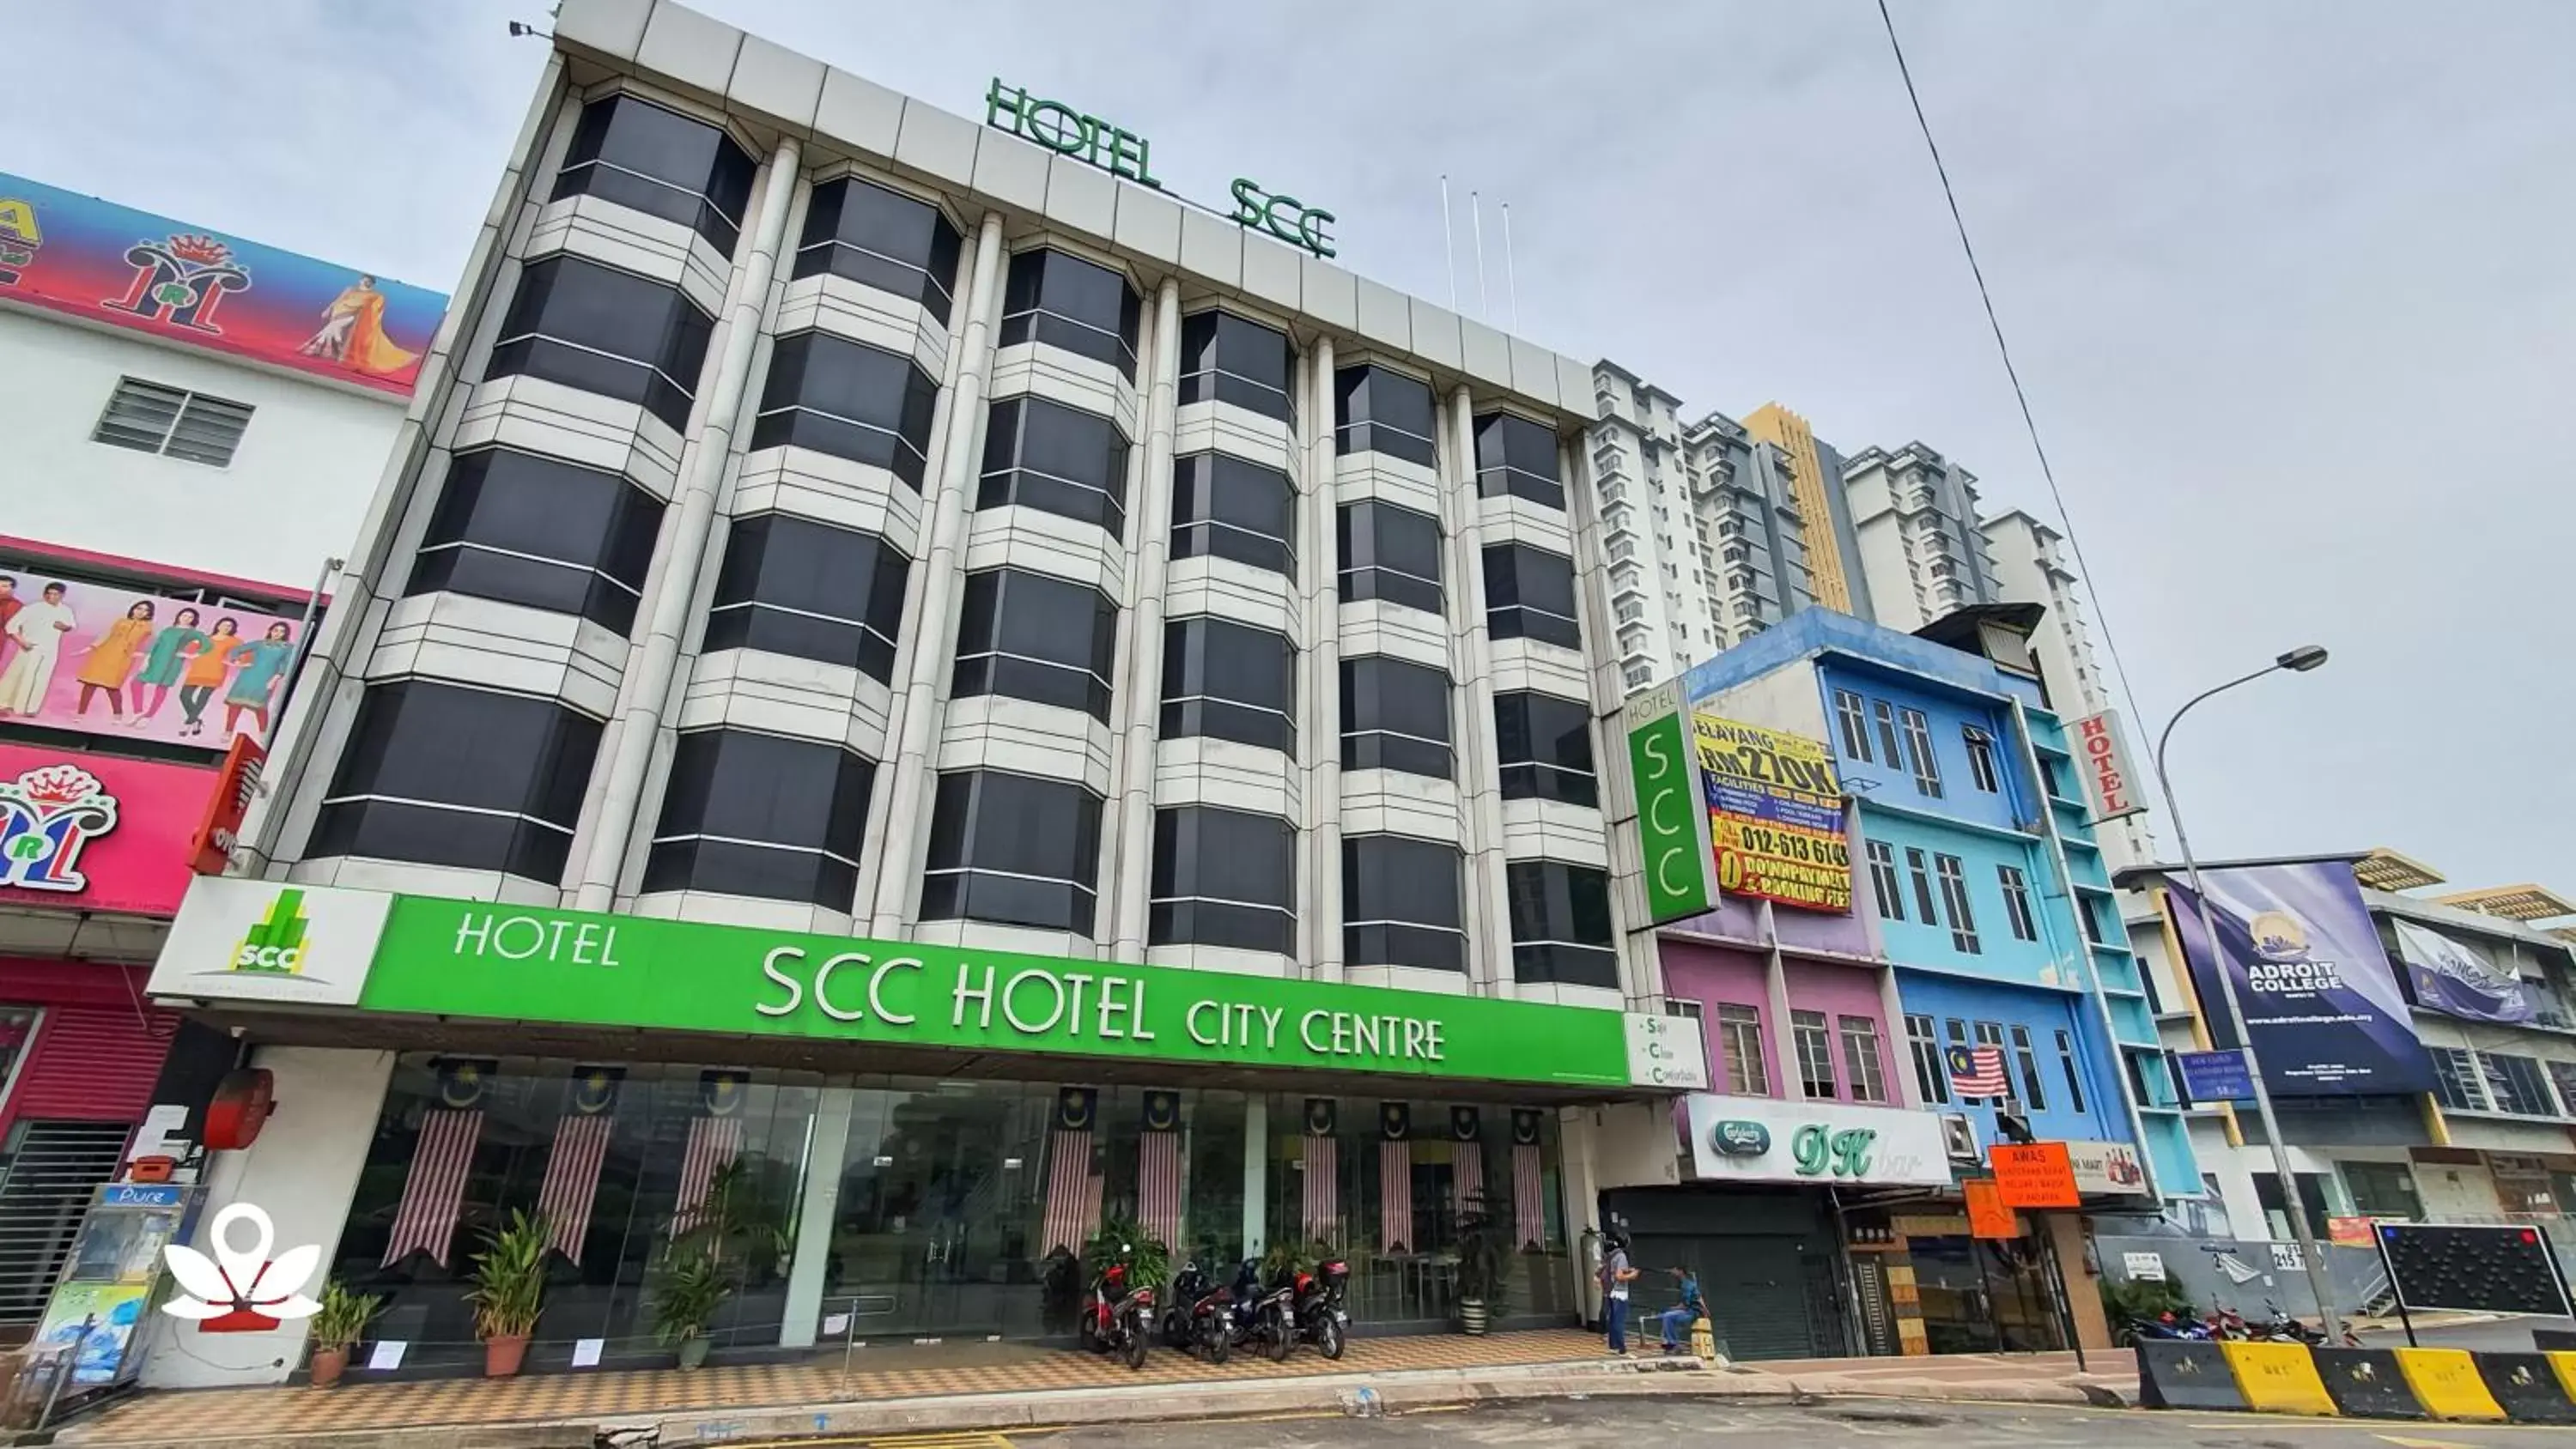 Property Building in SCC Hotel